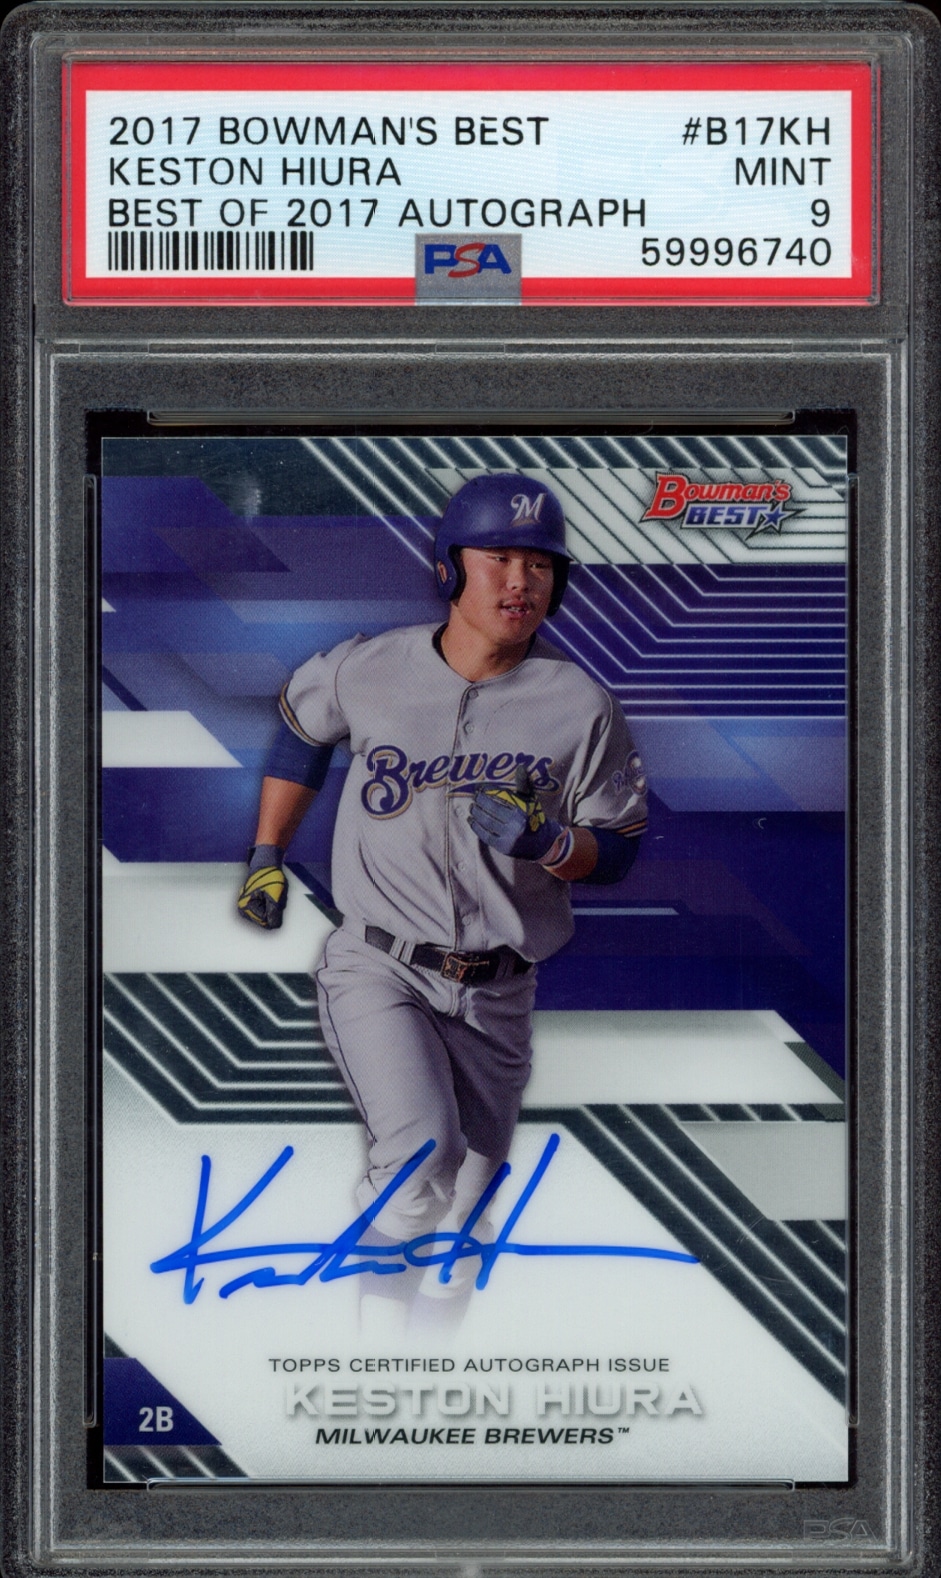 2017 Bowmans Best signed card of Milwaukee Brewers player Keston Hiura, graded MINT 9 by PSA.